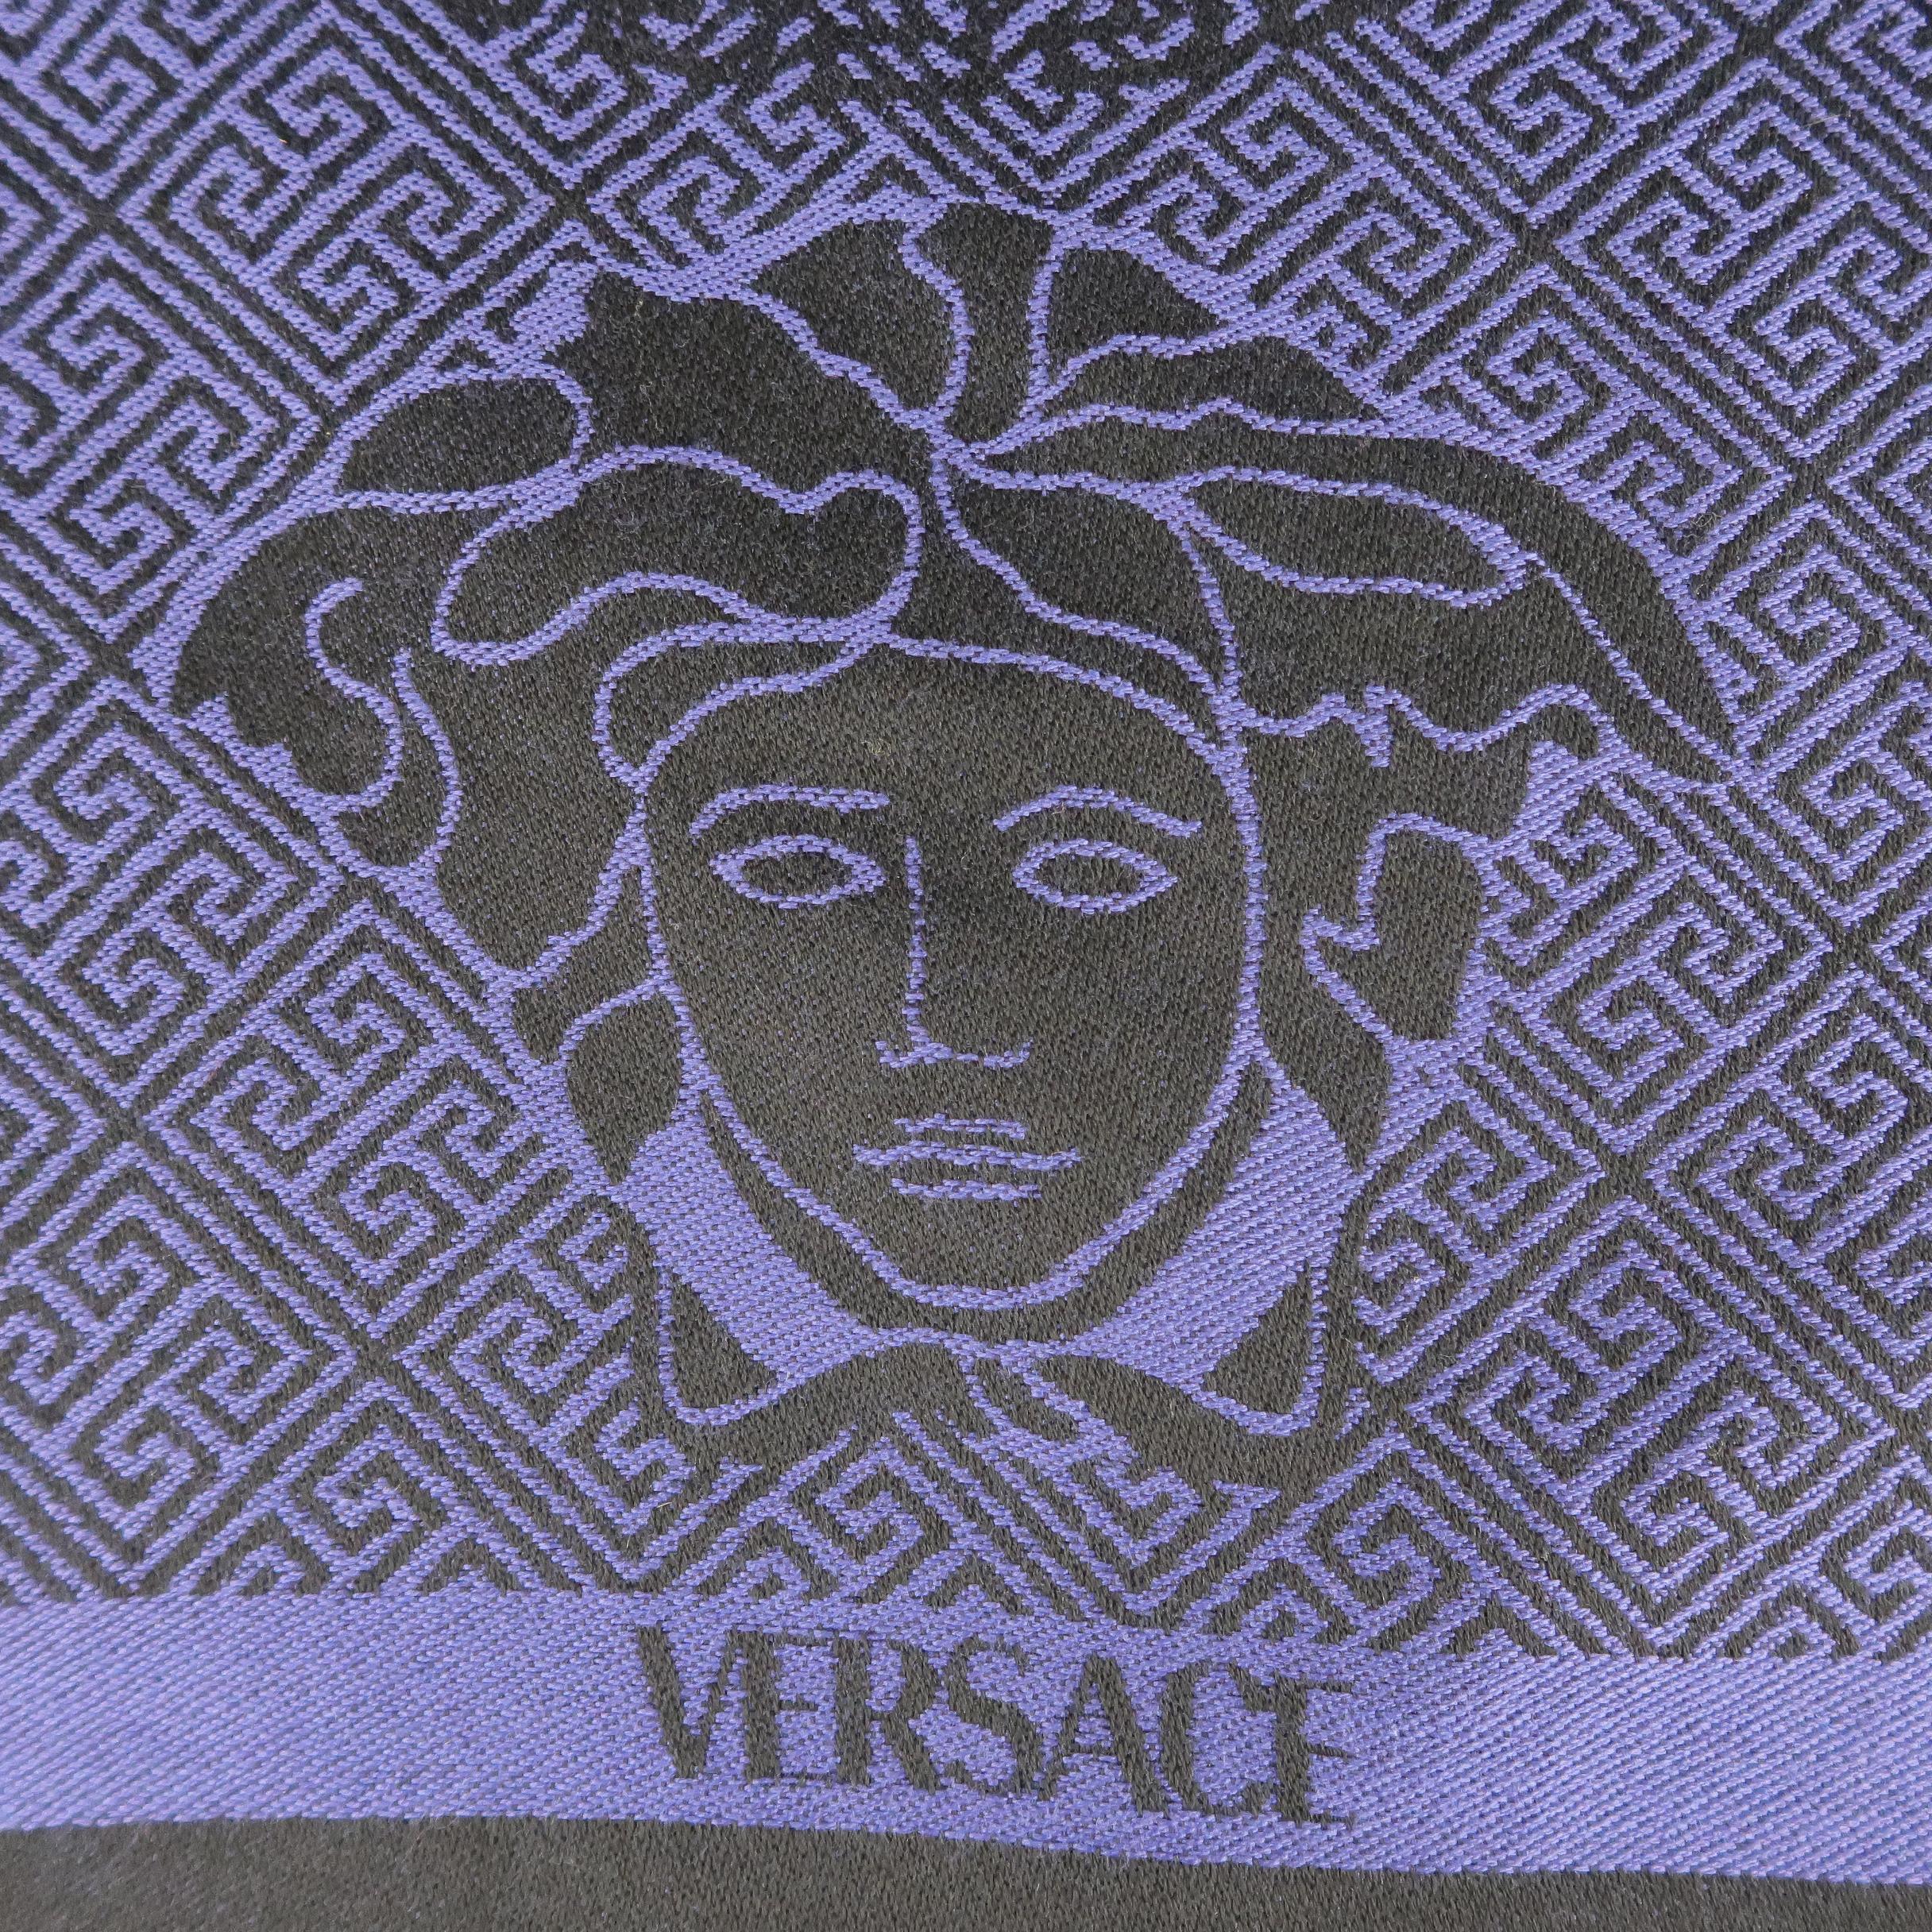 GIANNI VERSACE winter scarf comes in black and purple wool knit with all over pattern, fringed edge, and double Medusa logo print. Wear around label. As-is. Made in Italy.
 
Very Good Pre-Owned Condition.
 
72 x 16.5 in.